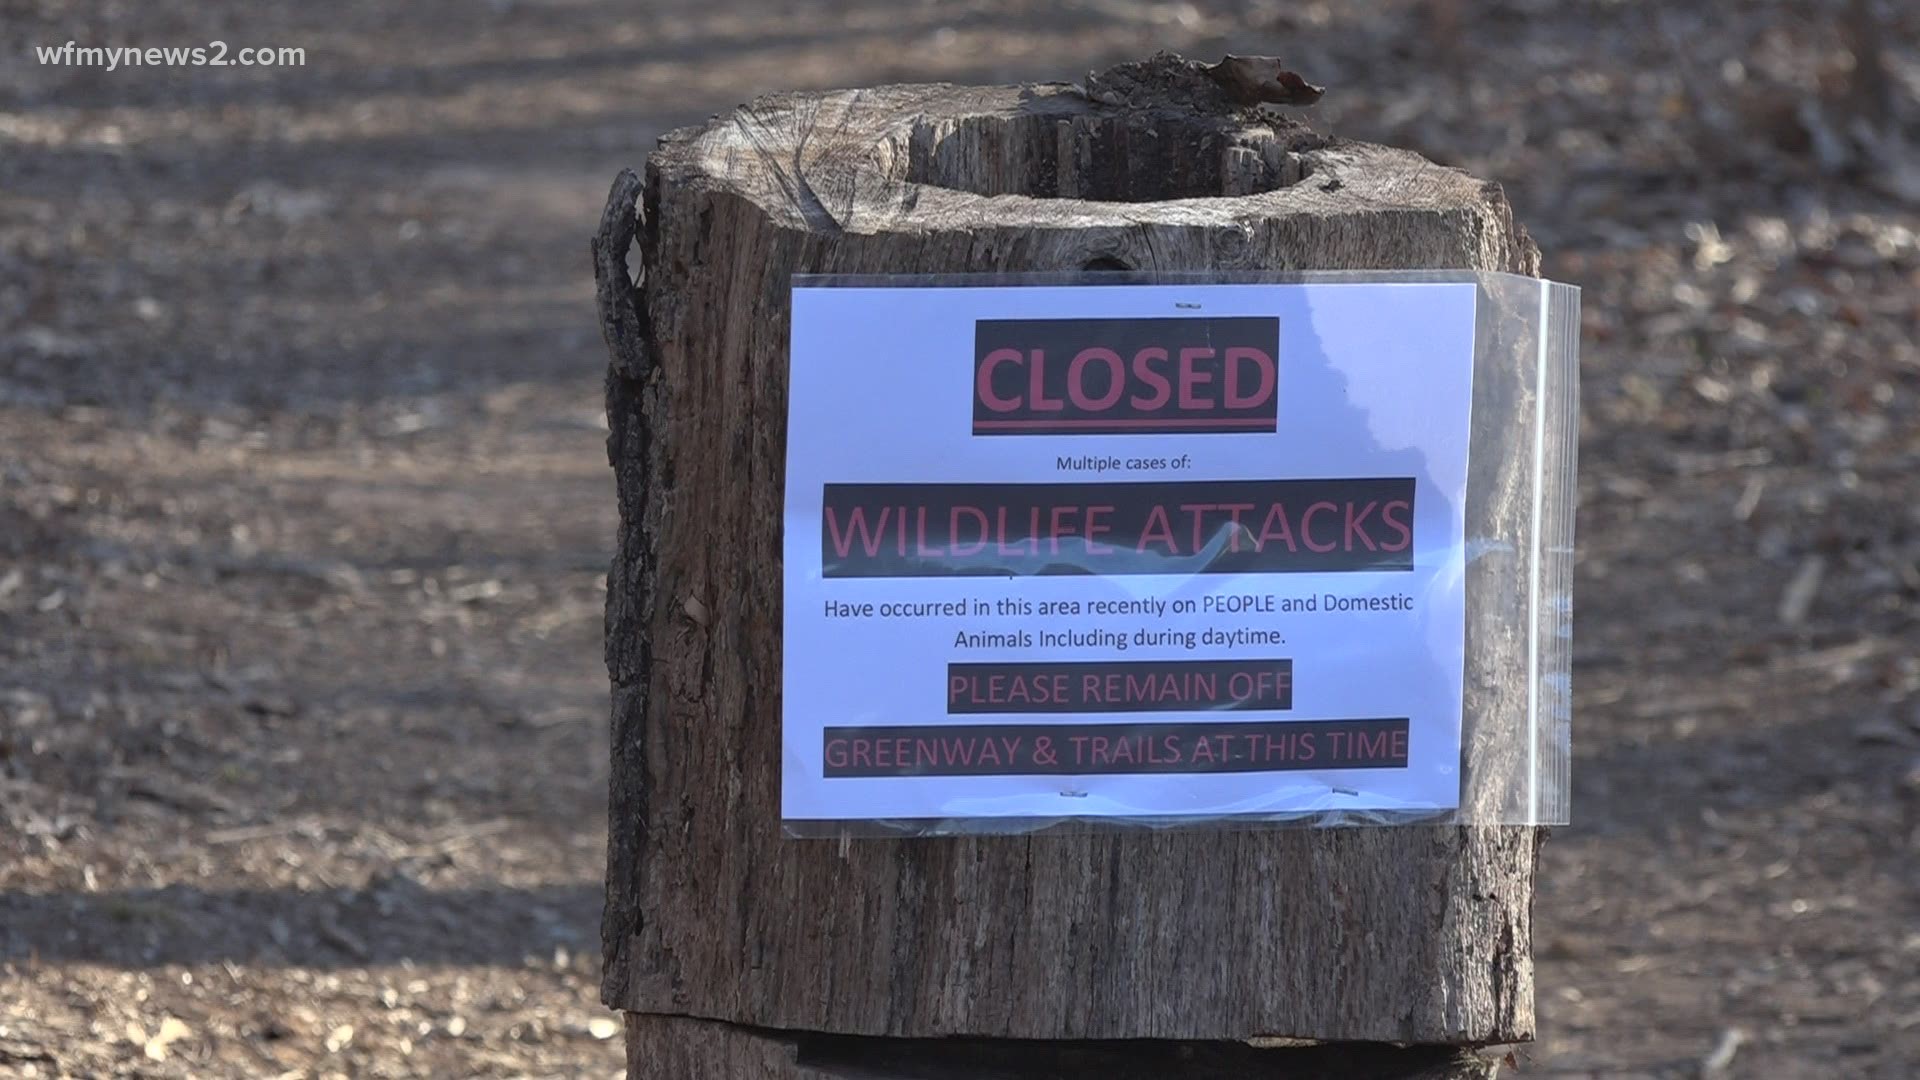 Prescott officials warn of aggressive coyote, at least four people attacked